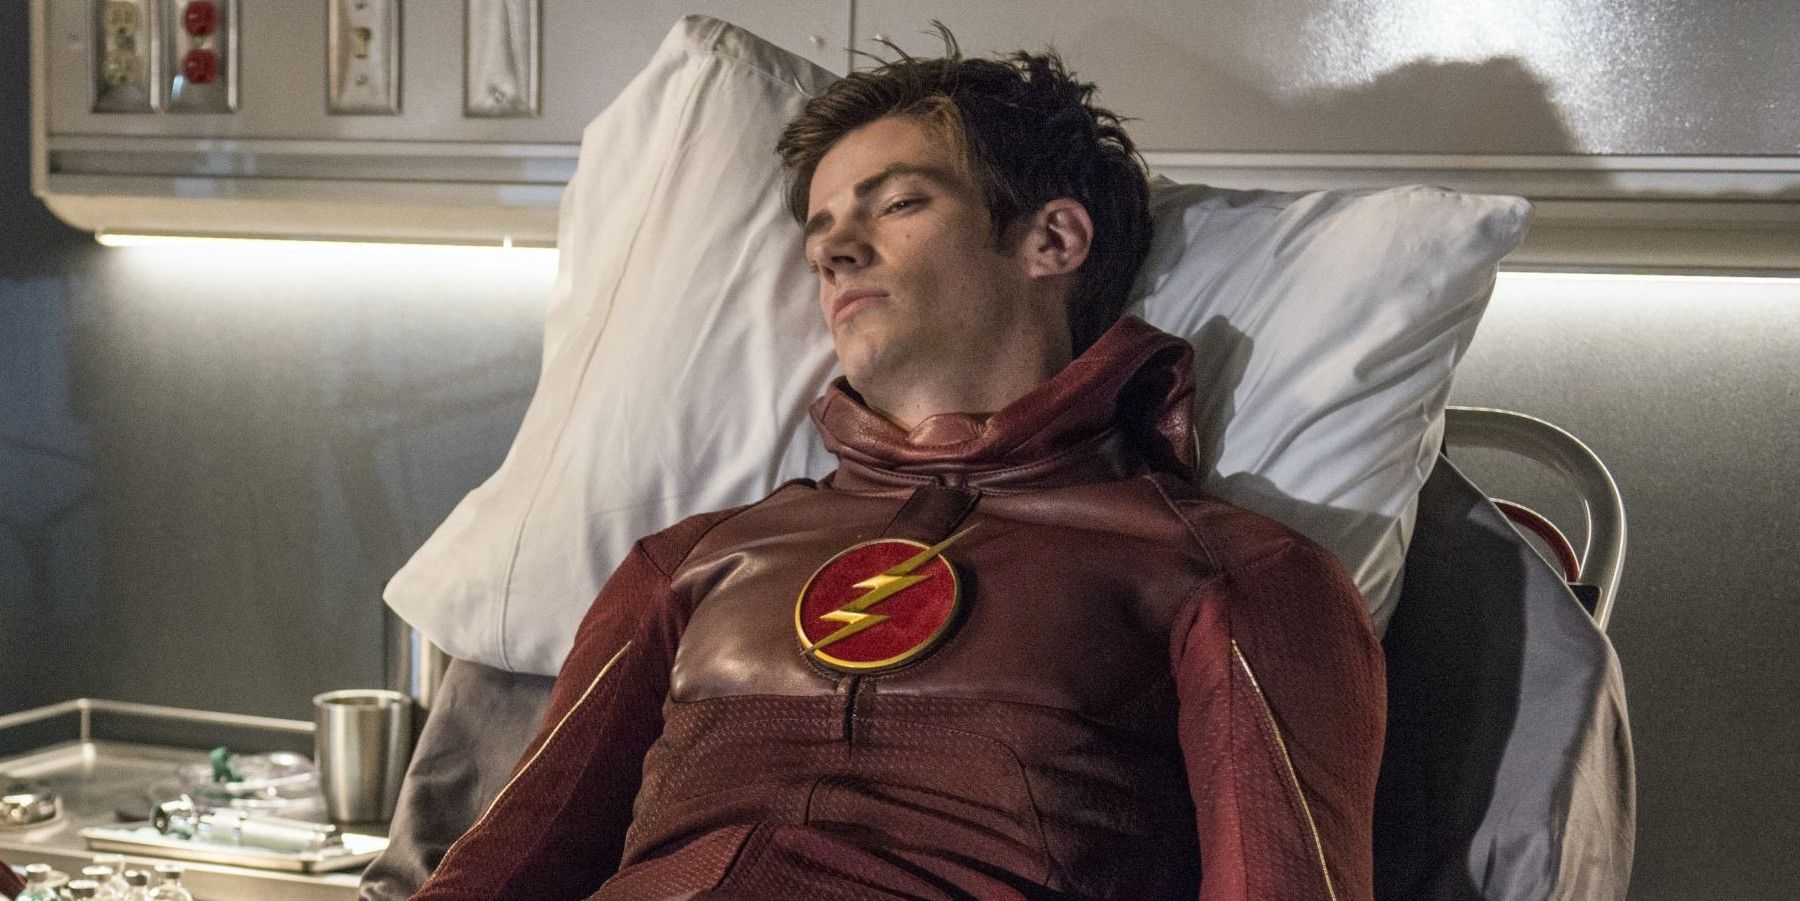 Barry Allen lying in a hospital bed, looking beat up and with his suit unzipped from the neck up to reveal his face